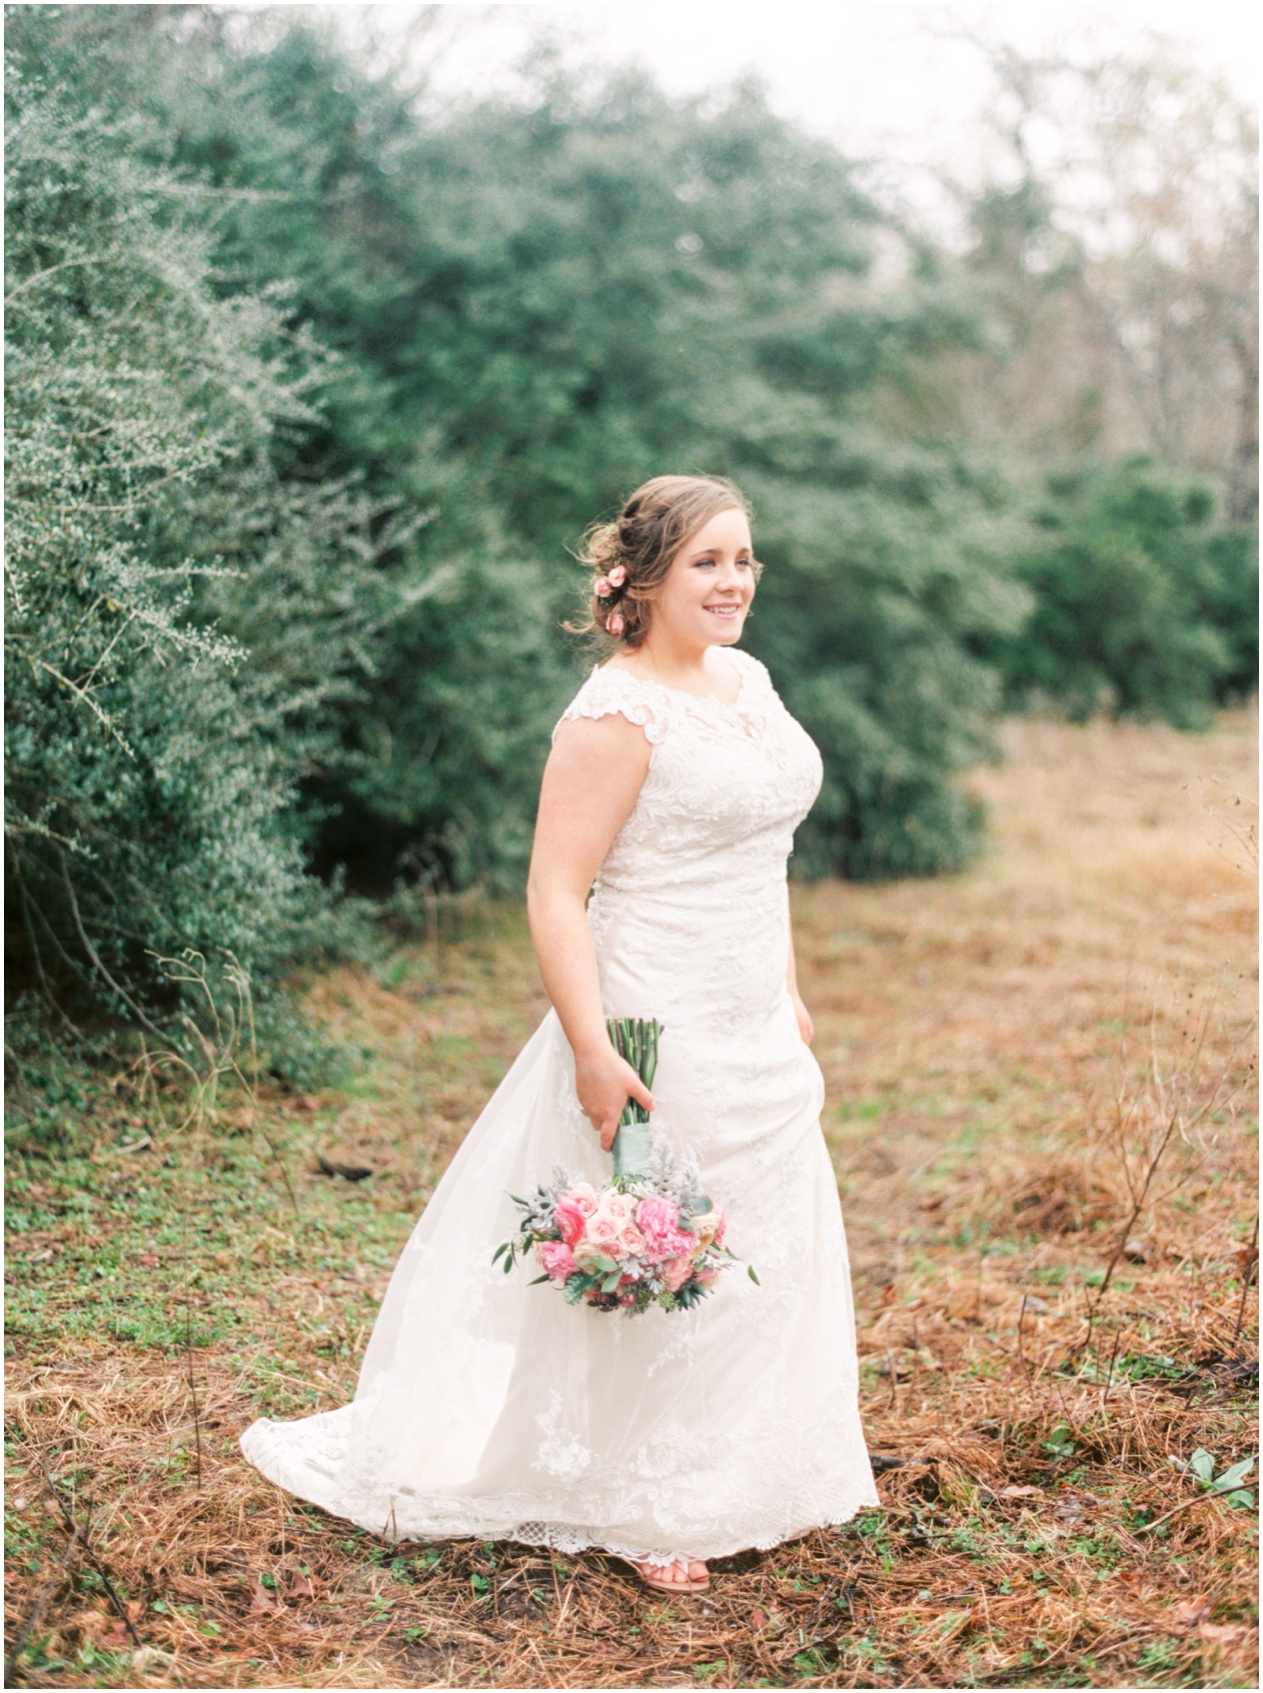 Sarah Best Photography - Claire's Bridals - The Amish Barn at Edge-36_STP.jpg